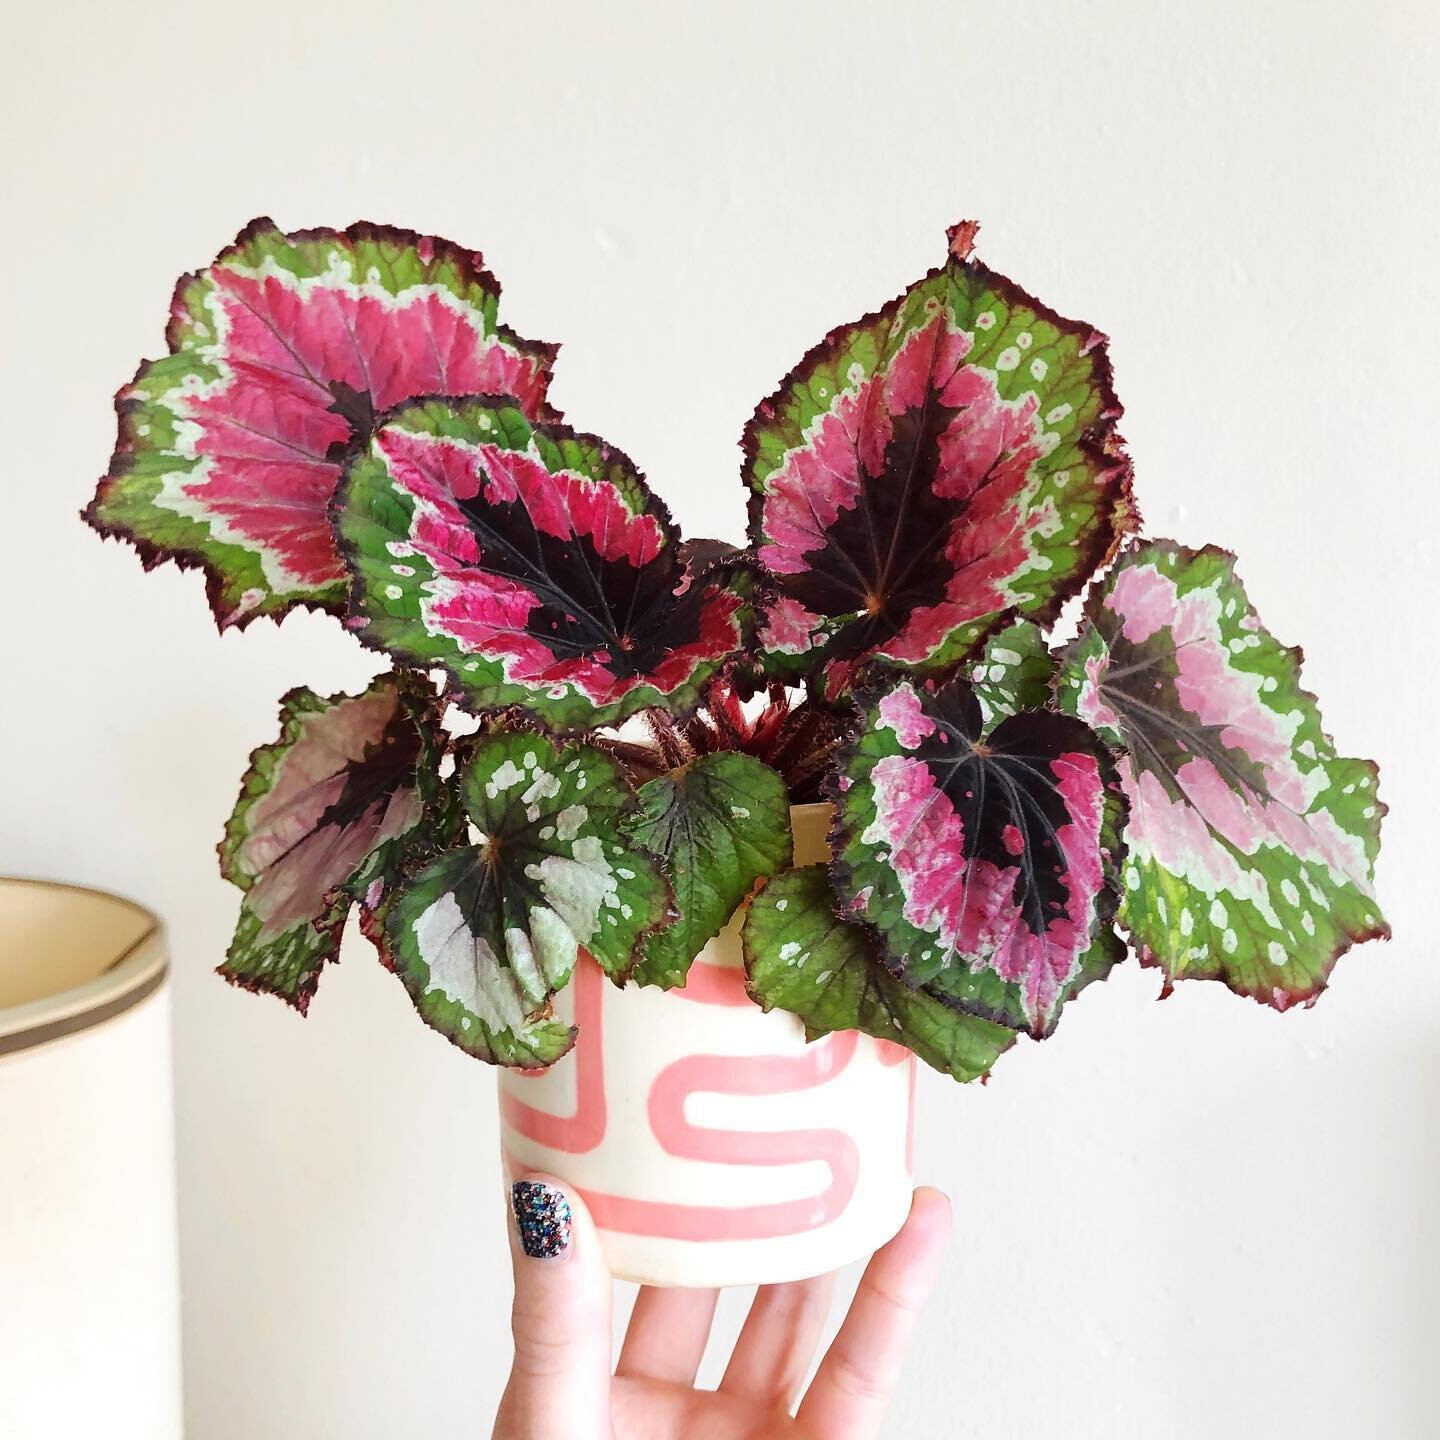 This rex begonia is looking fly in my pot but I think she needs a bigger one! 🌿 #iloveplants #rexbegonia #cutepots #handmadepottery #begonia #houseplants #houseplantlove #plantlady #cuteplants #plantlover